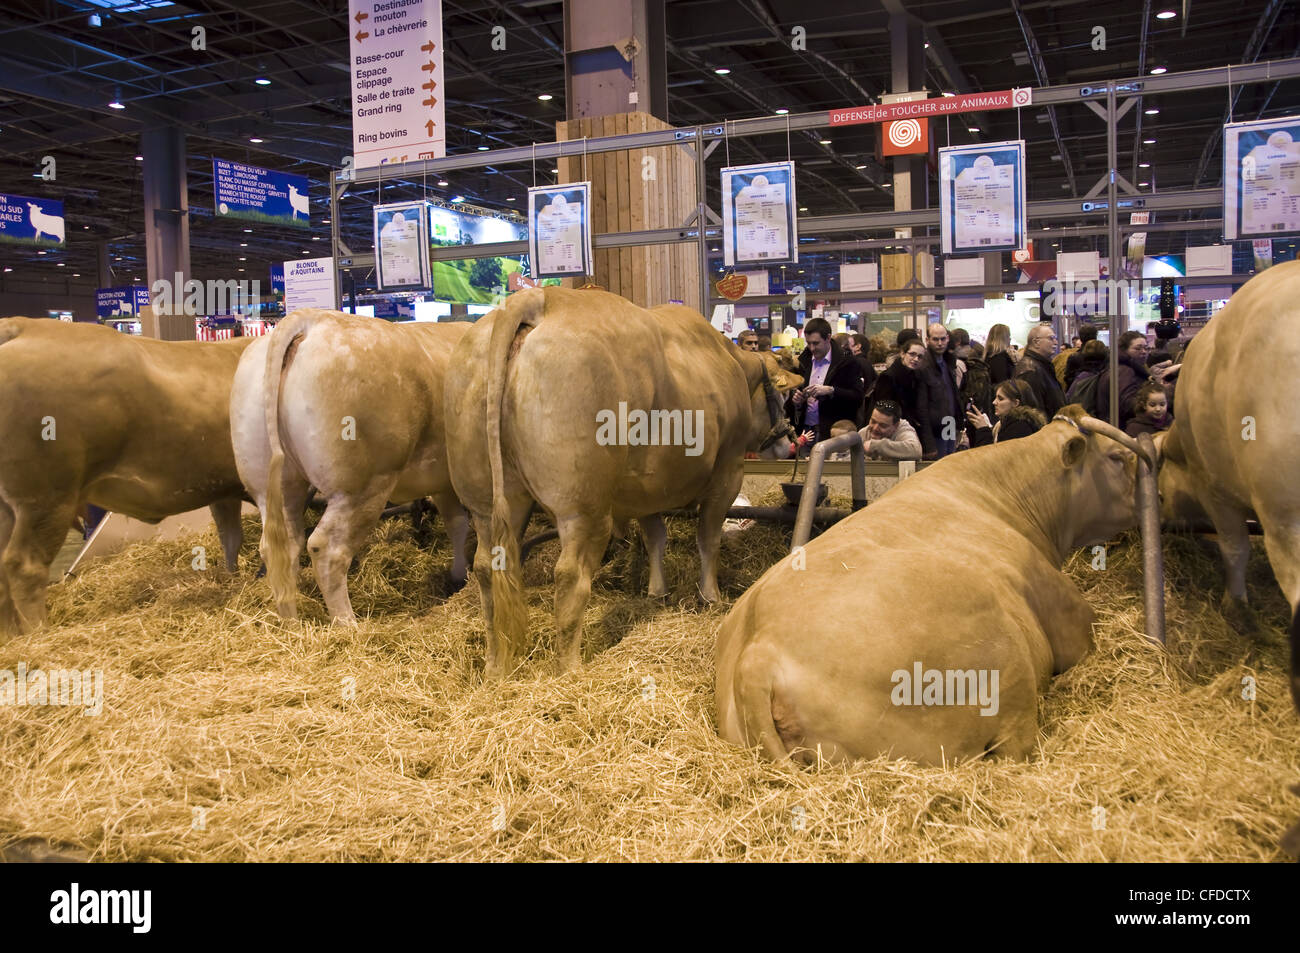 Charolaise cows at Paris International Agriculture Show - France Stock Photo